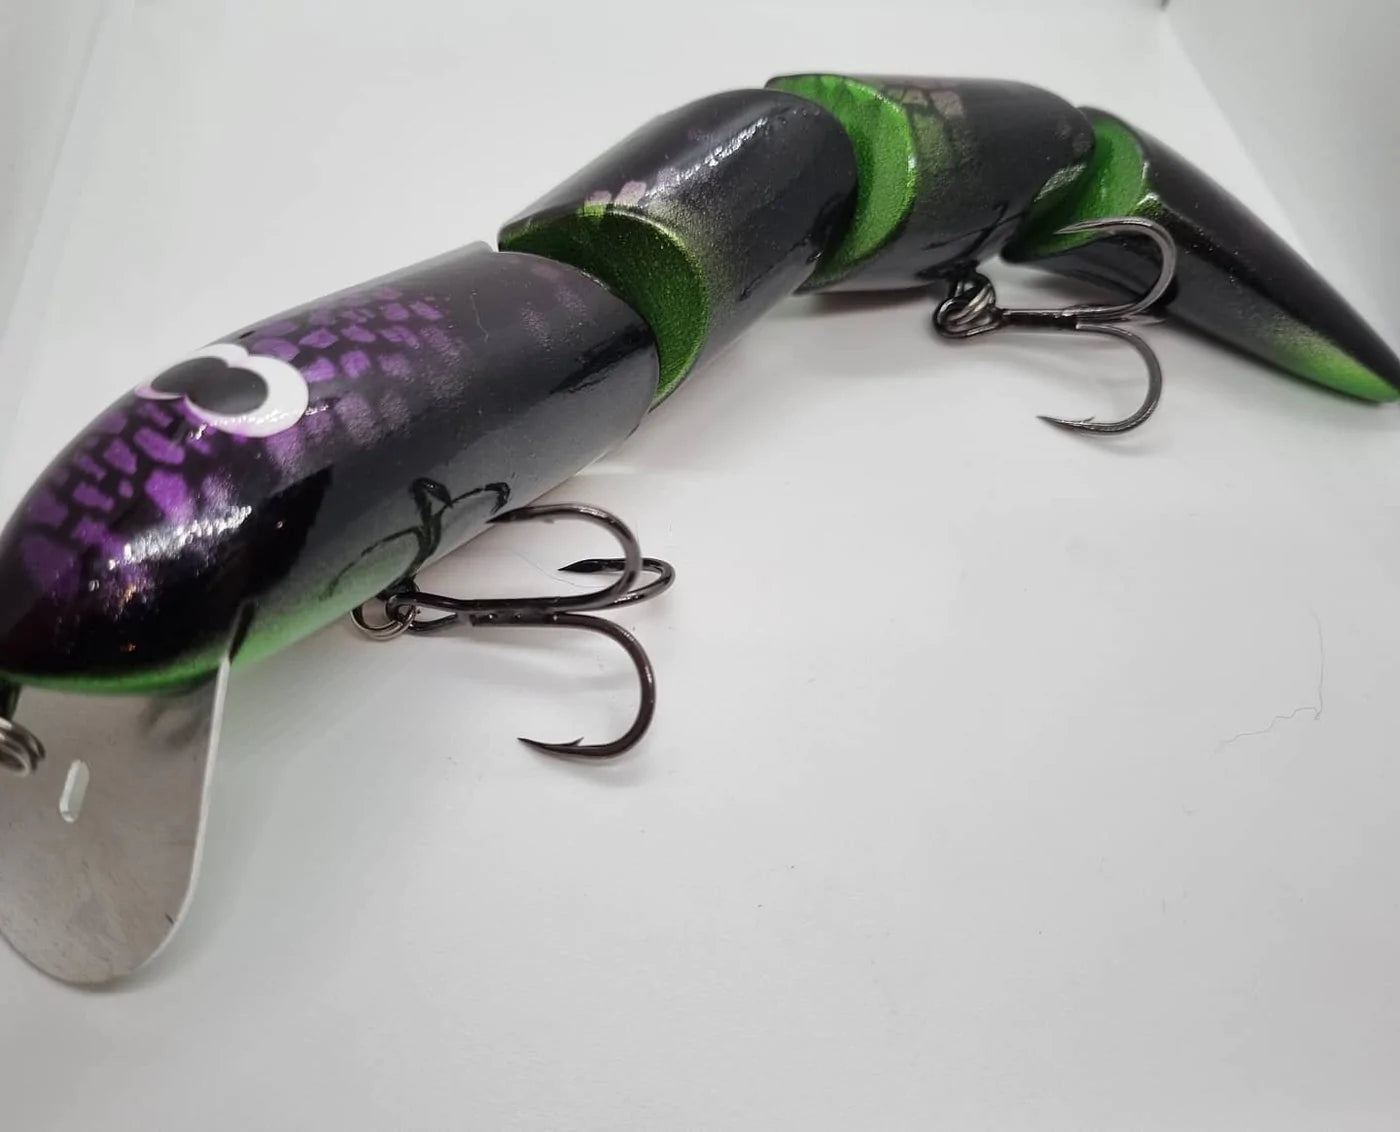 Mudeye Lures Snake - NUCLEAR FUSION - Mansfield Hunting & Fishing - Products to prepare for Corona Virus